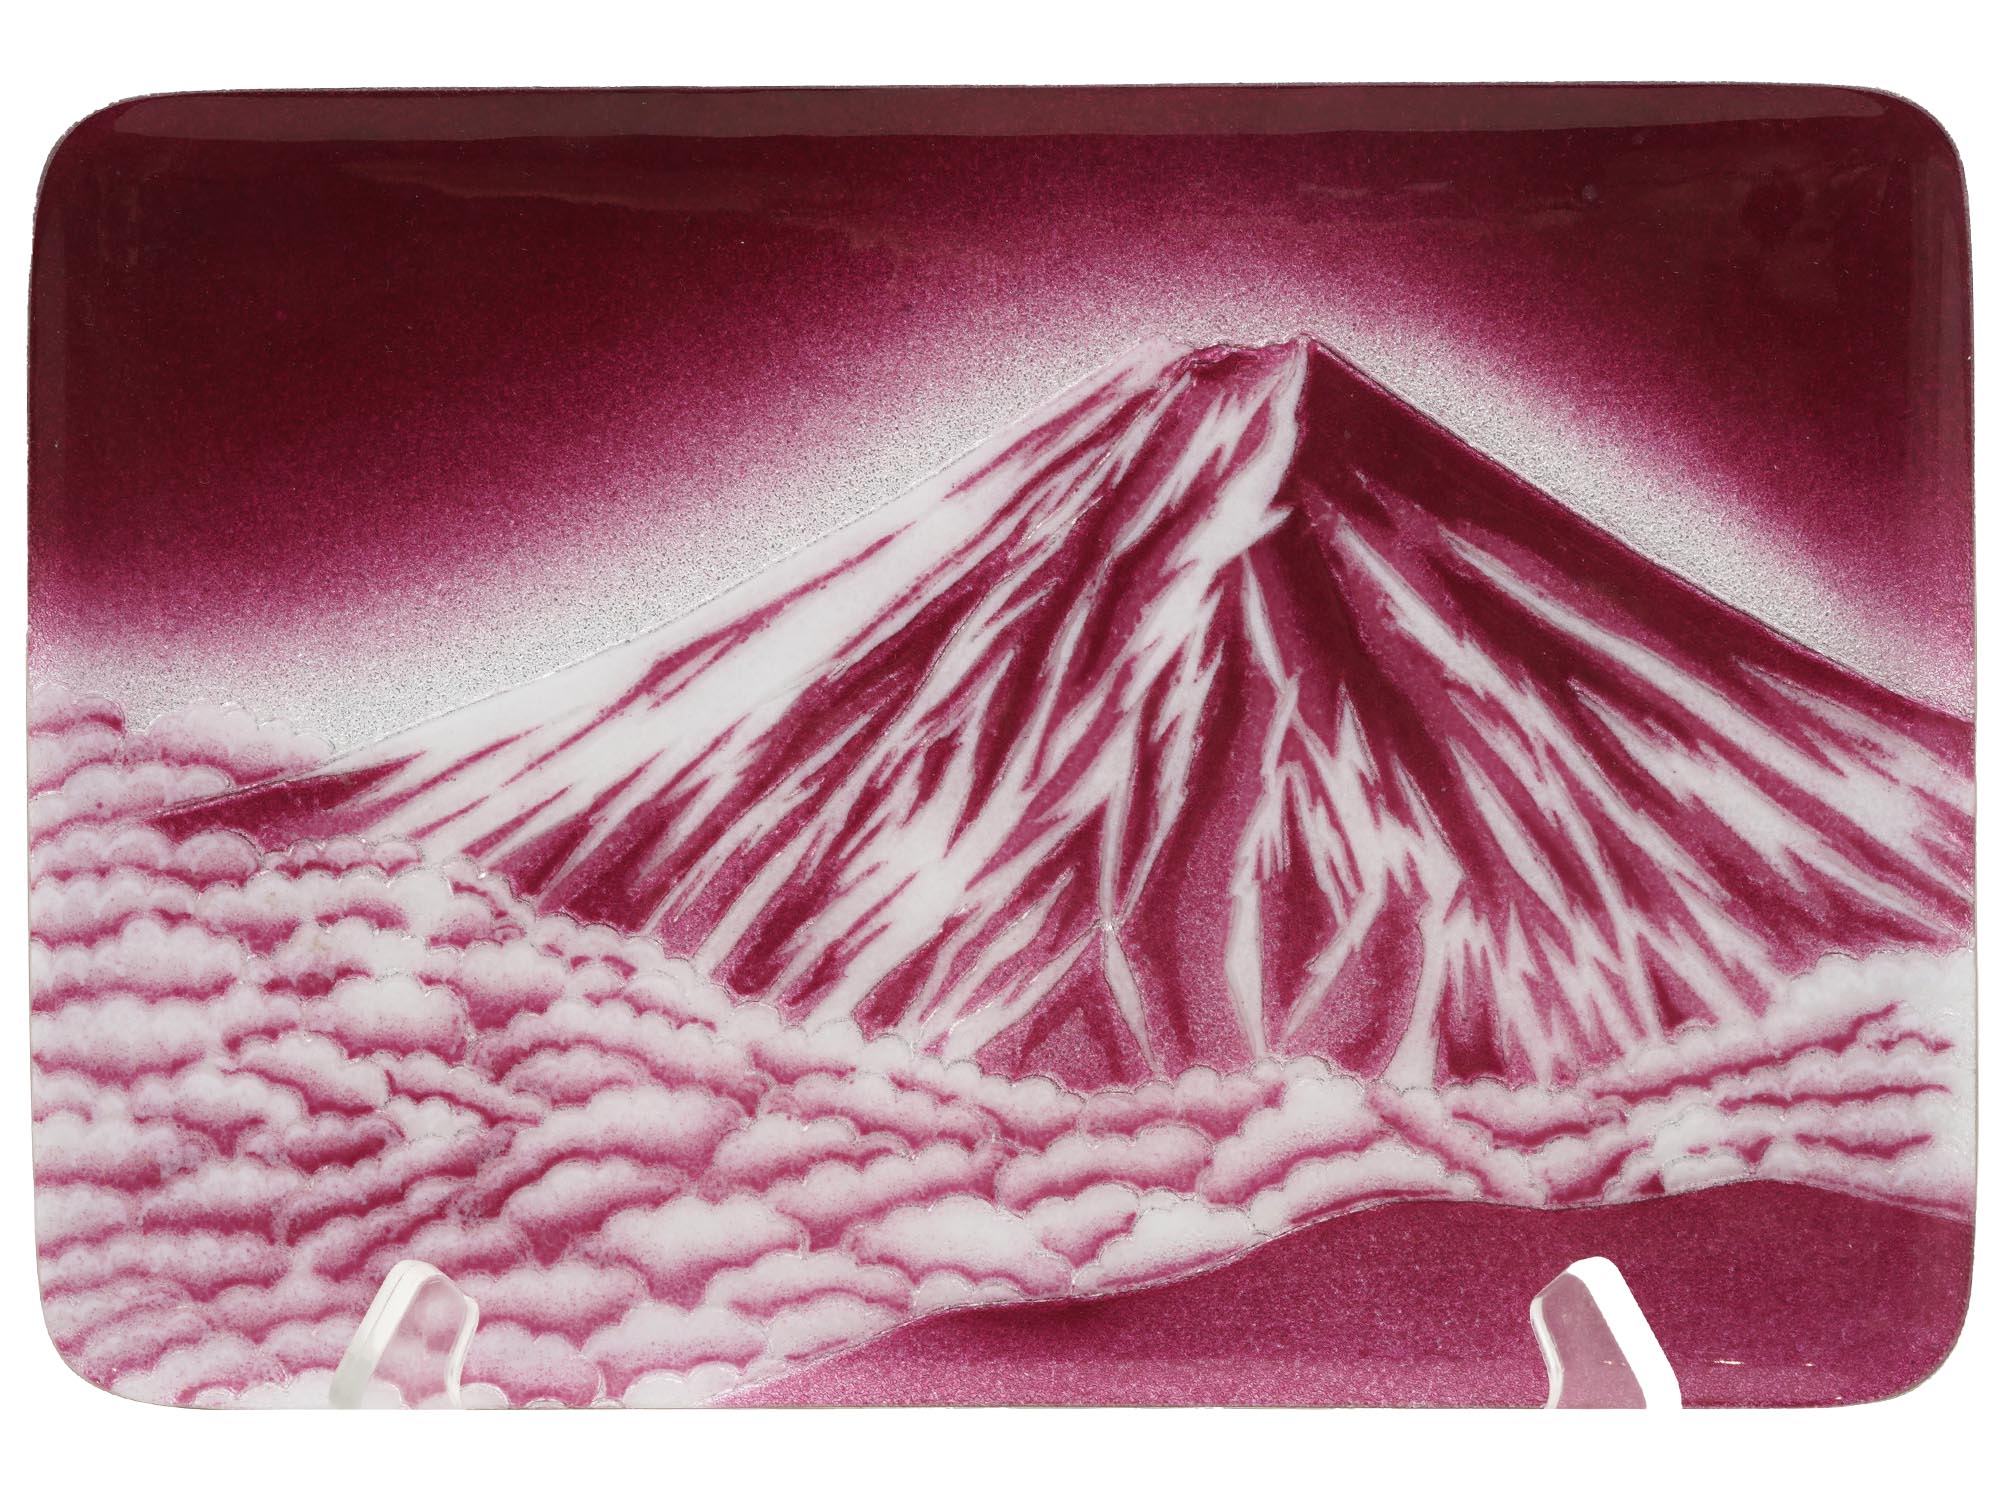 JAPANESE WIRELESS CLOSIONNE TRAY WITH MOUNT FUJI PIC-0